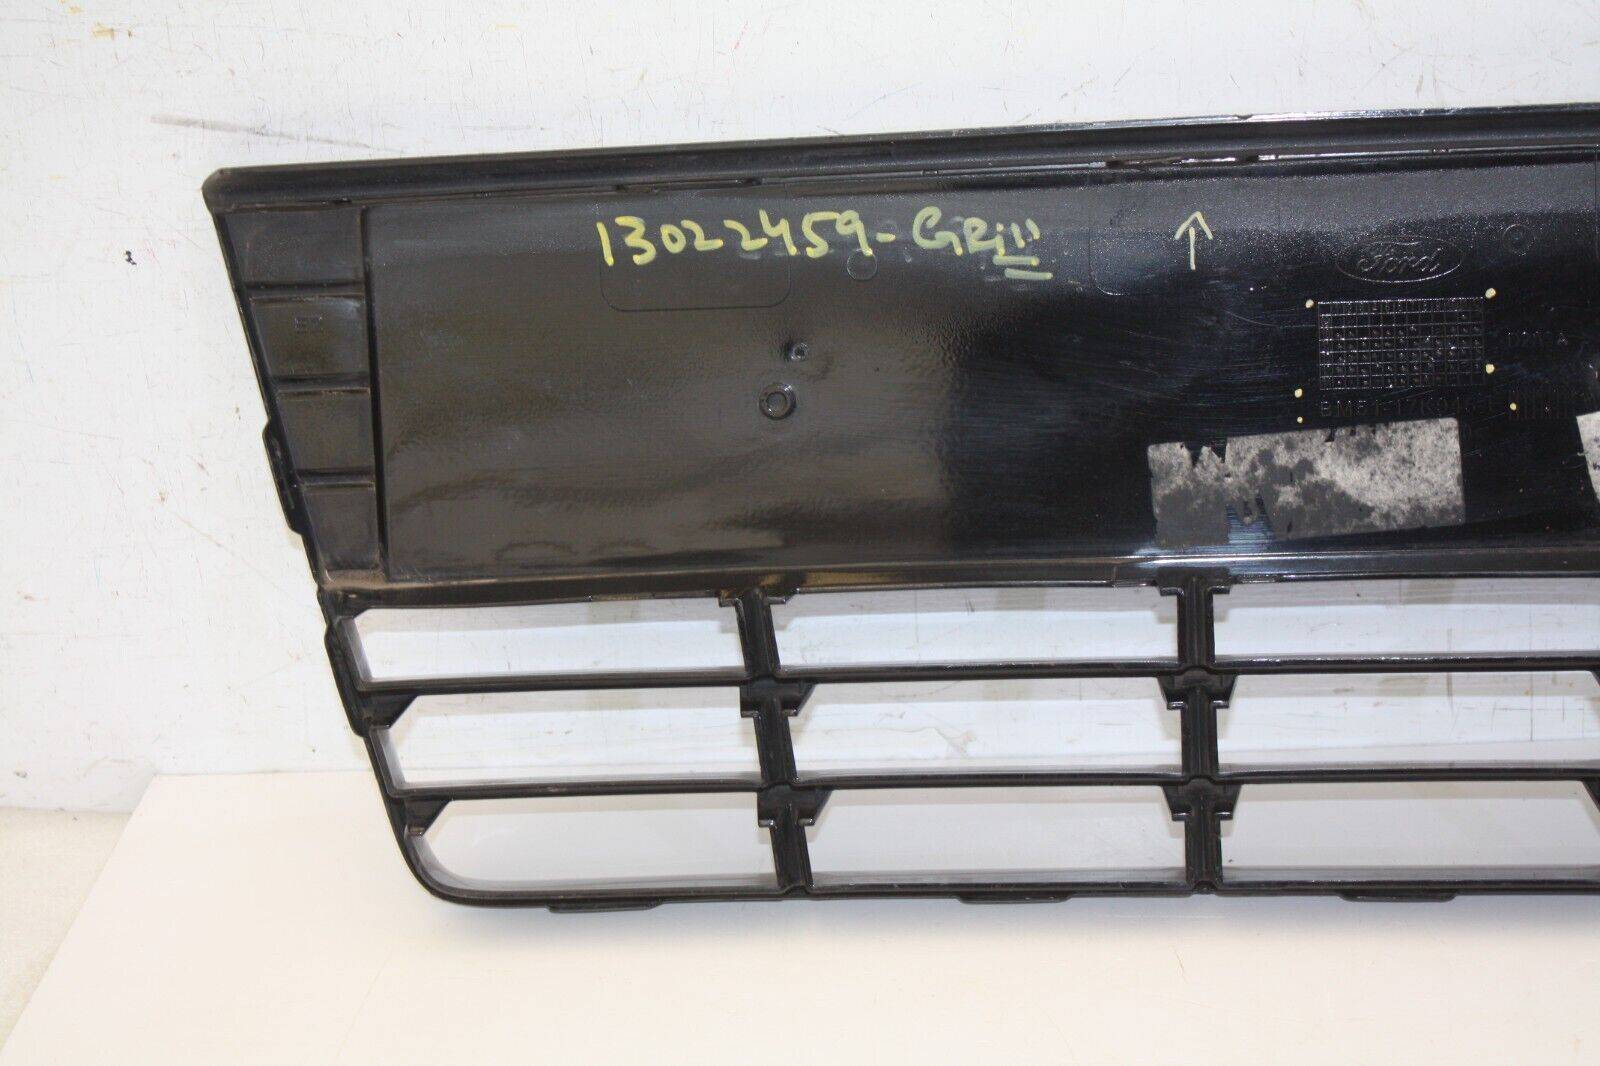 Ford-Focus-Front-Bumper-Grill-2011-TO-2014-BM51-17K945-E-Genuine-SEE-PICS-176238481574-12